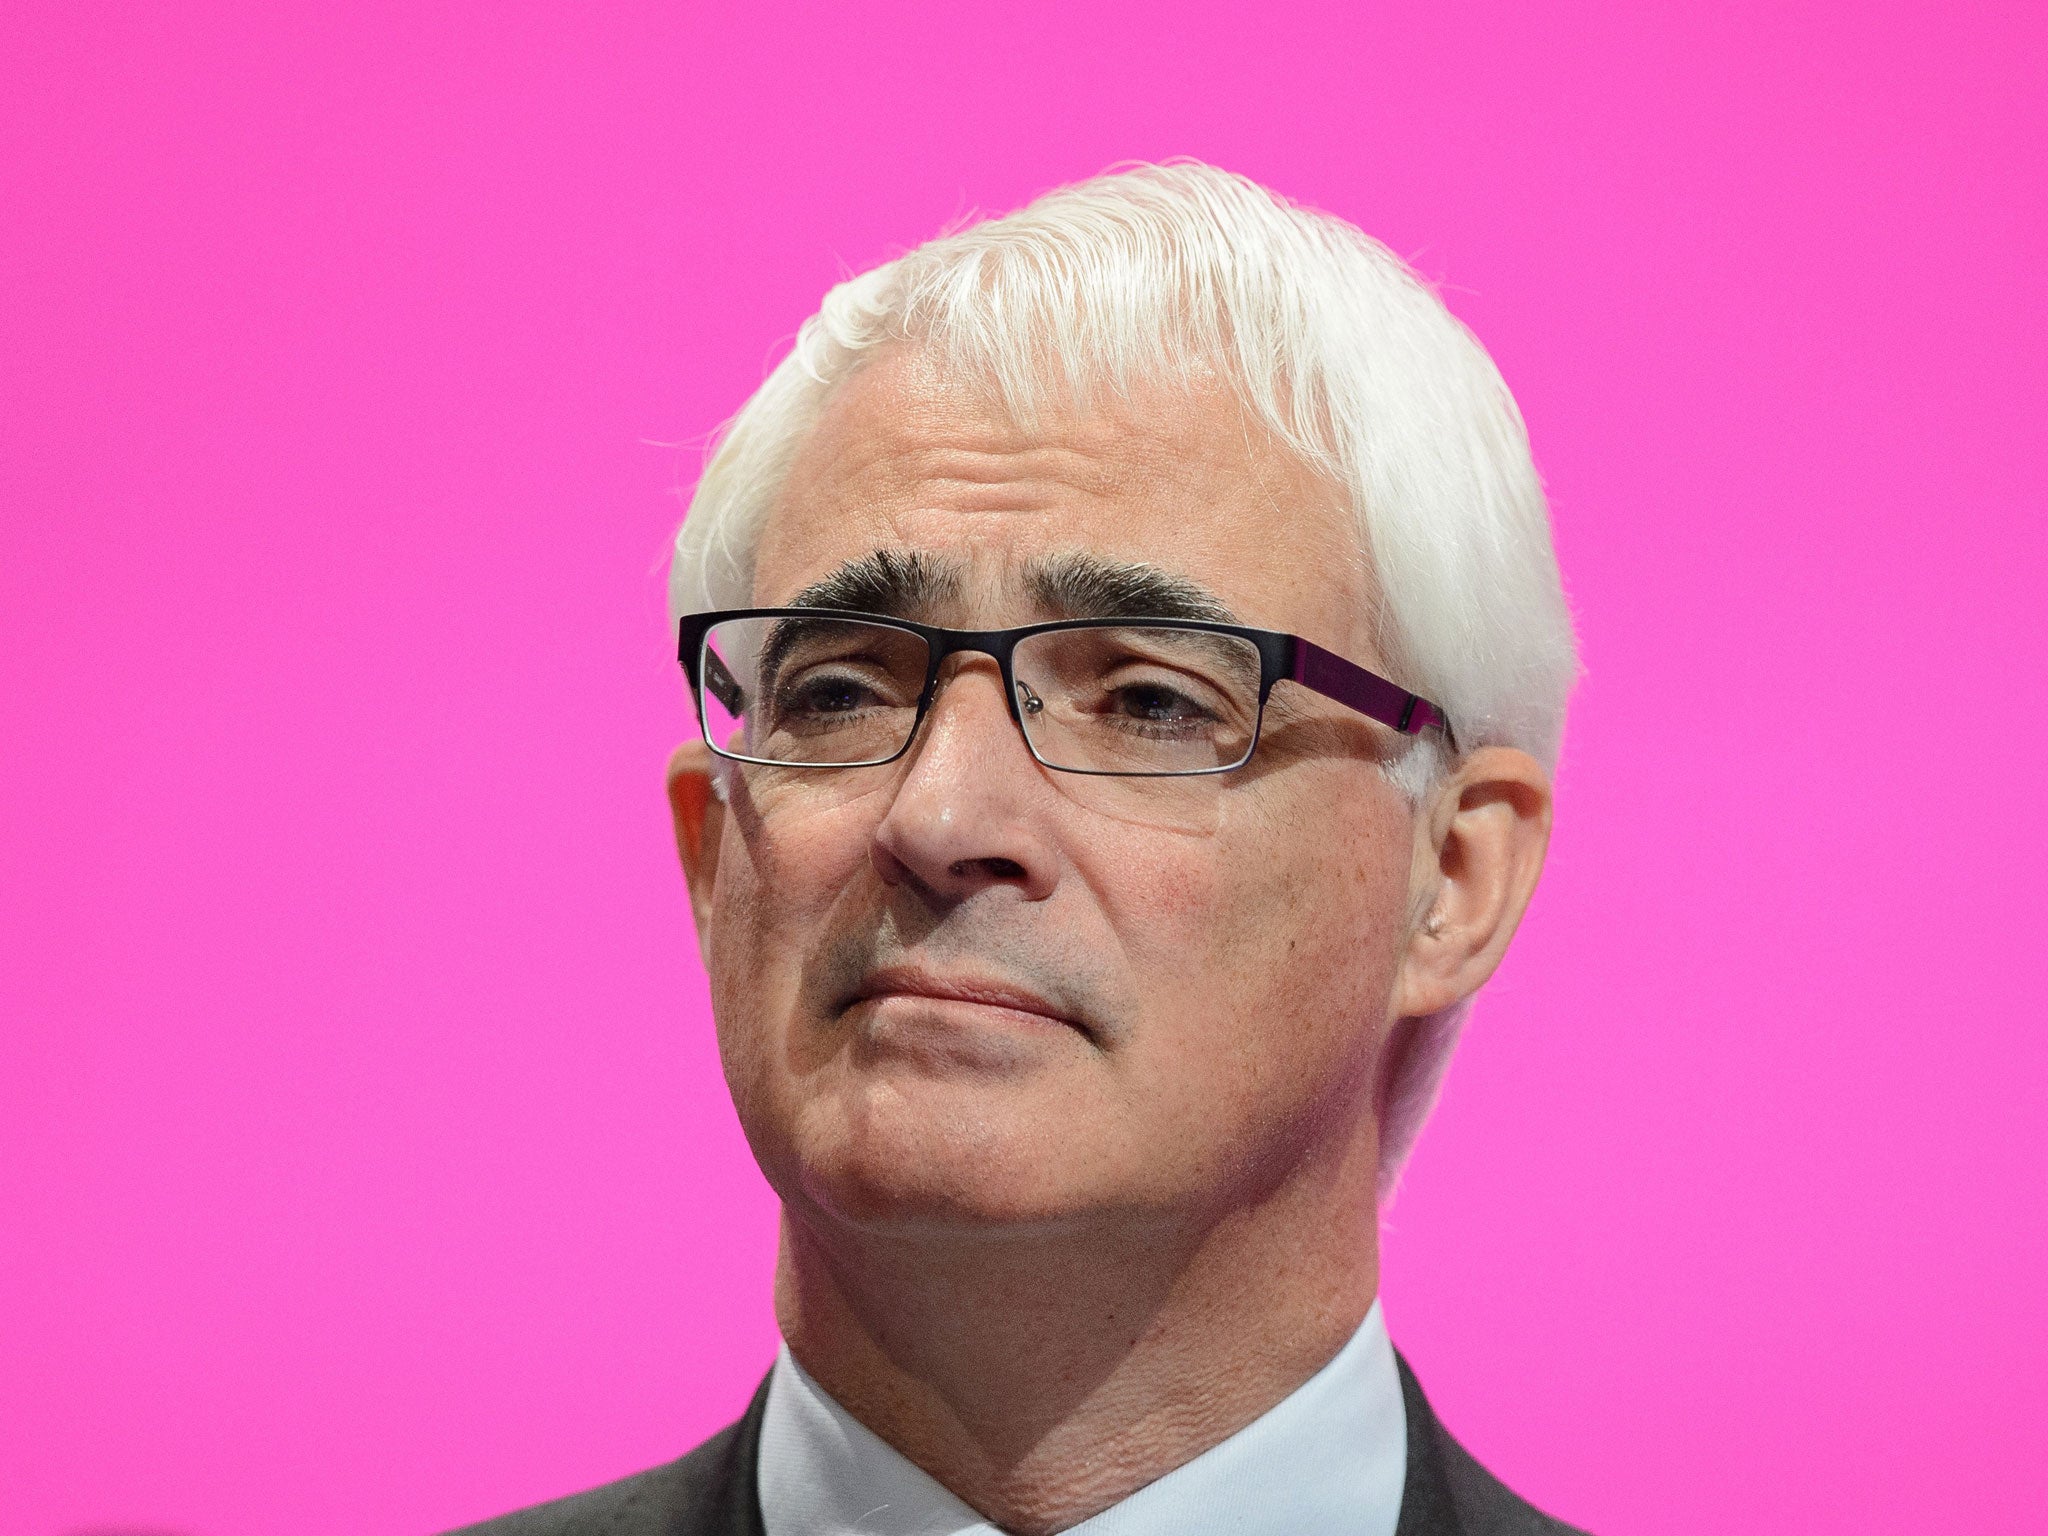 Former Labour chancellor Alistair Darling has backed the sharp cuts